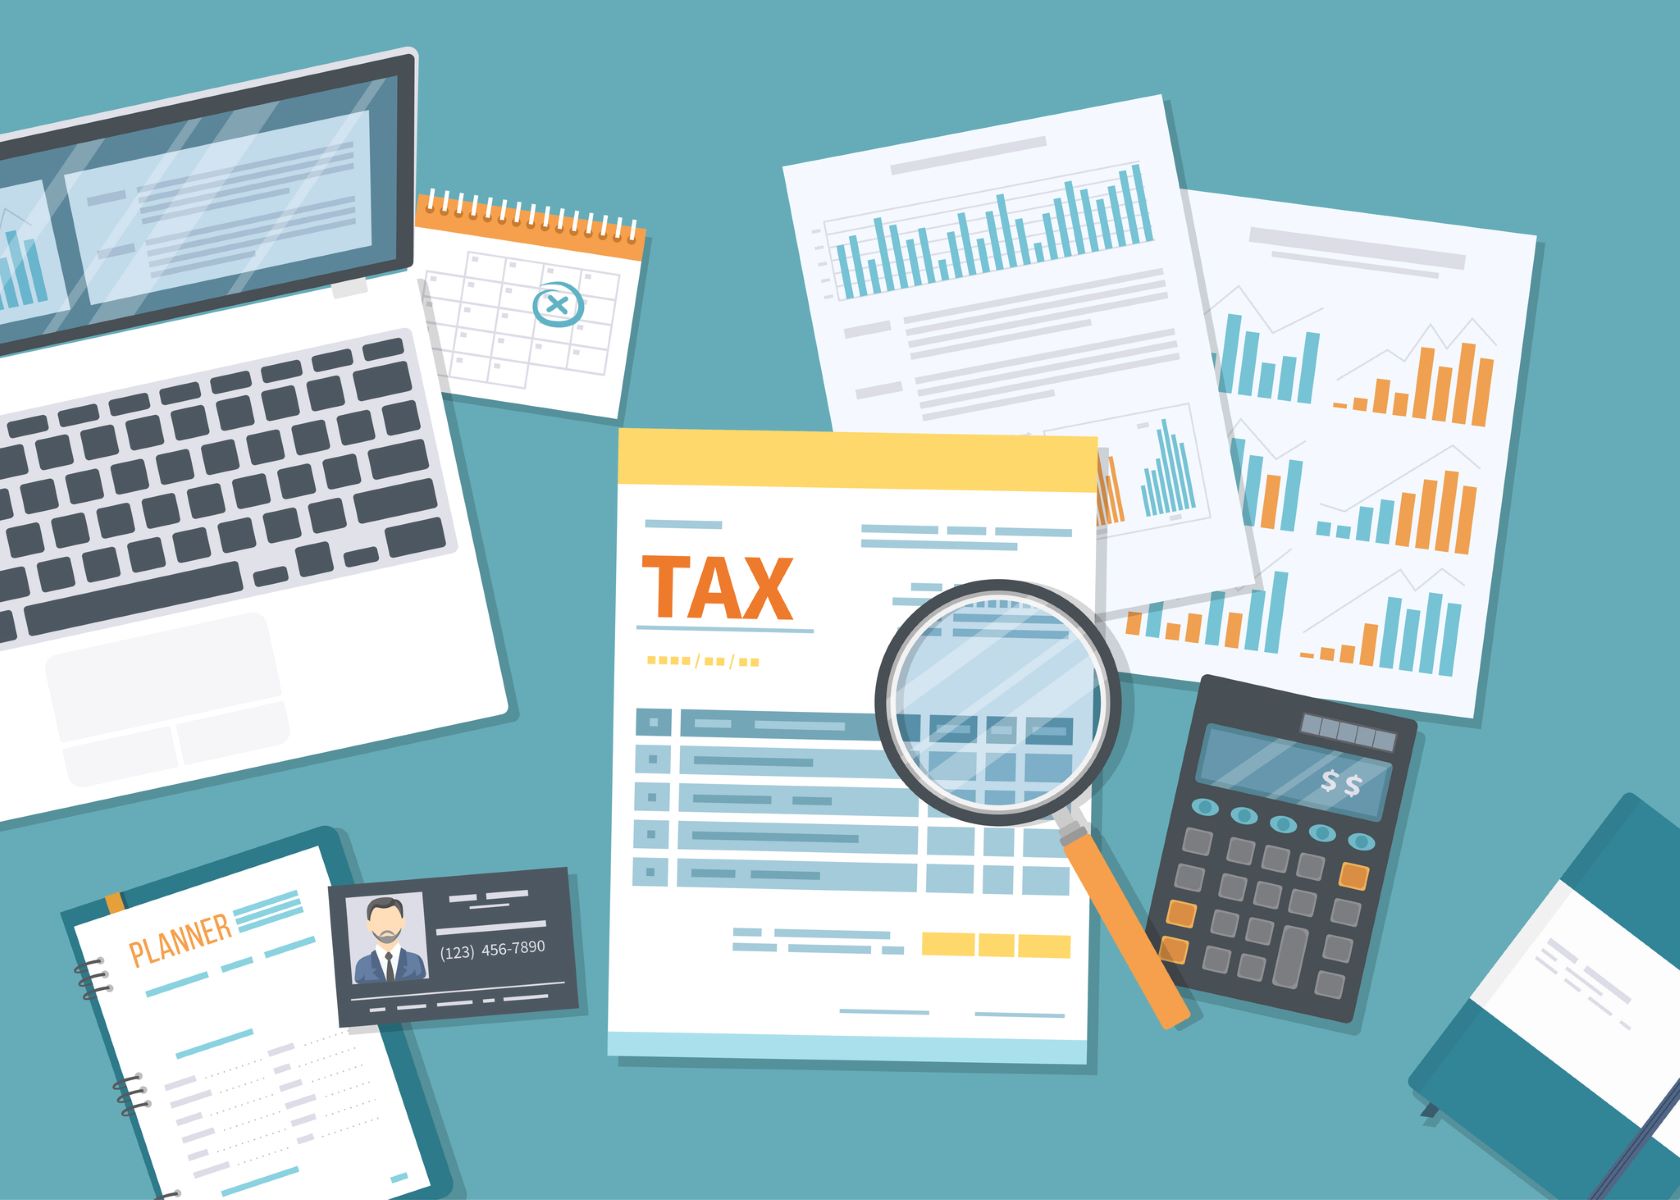 What Is The Difference Between An Income Tax And A Payroll Tax